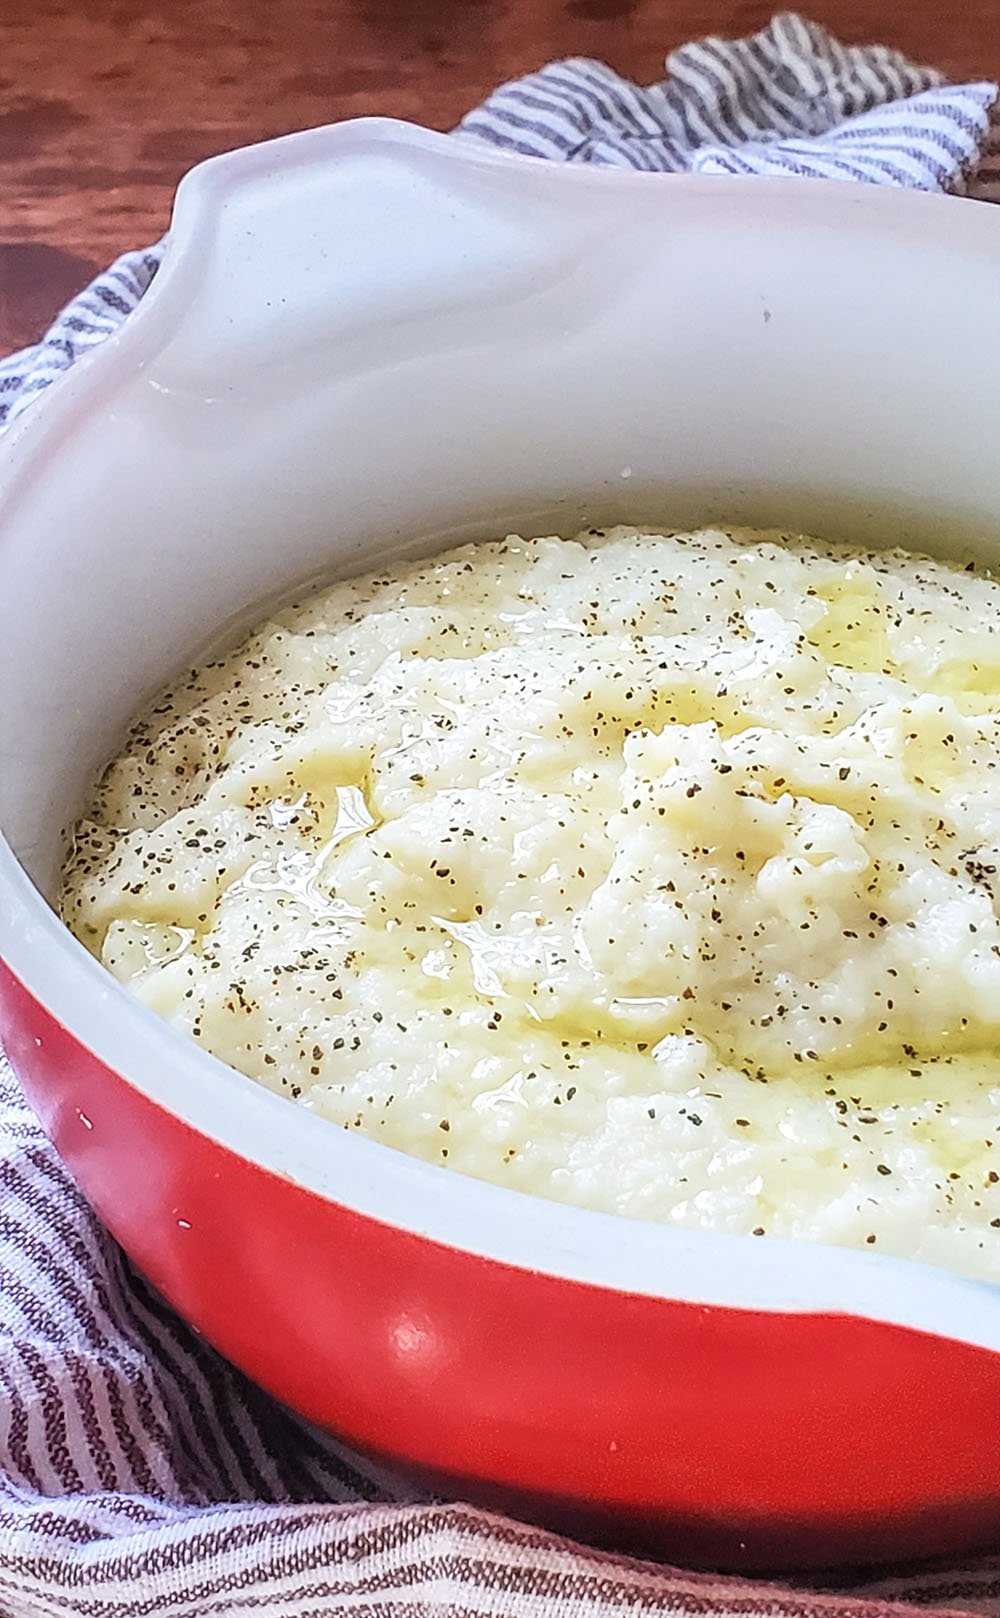 Creamy and flavorful, this is a perfect bowl of mashed cauliflower